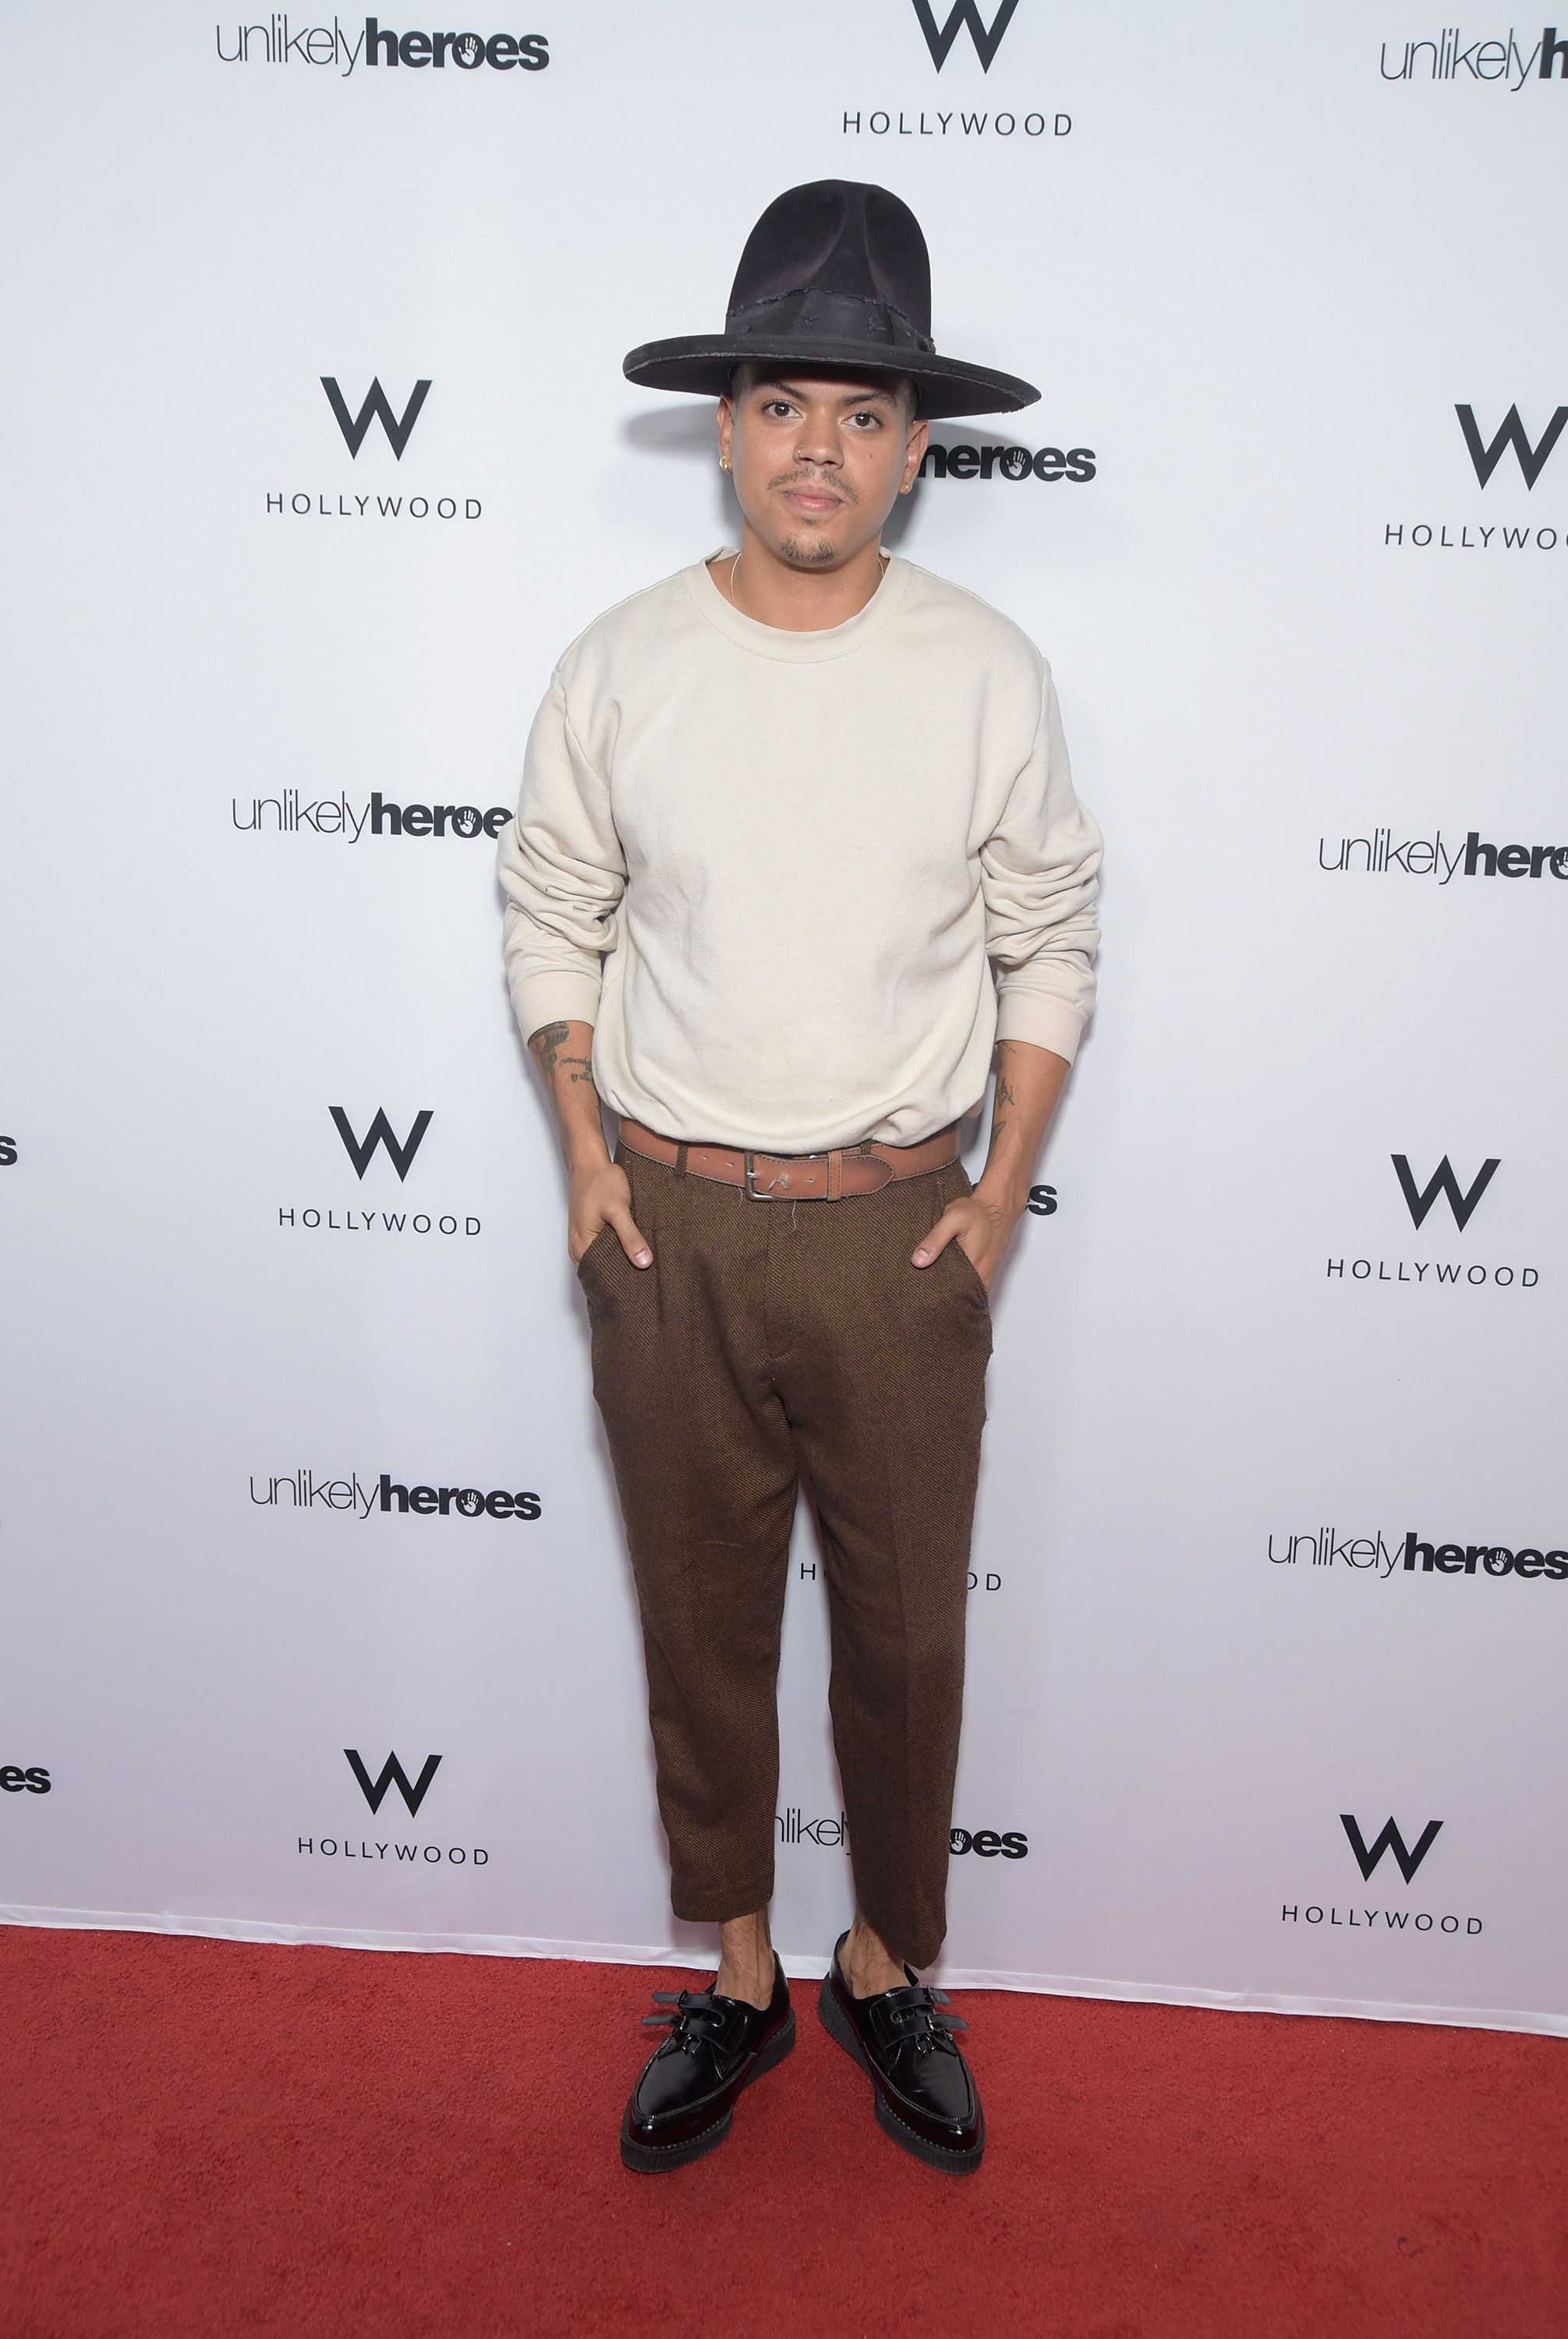 Evan Ross during "Nights Of Freedom LA" hosted by Unlikely Heroes at W Hollywood on June 21, 2018. | Photo: Getty Images